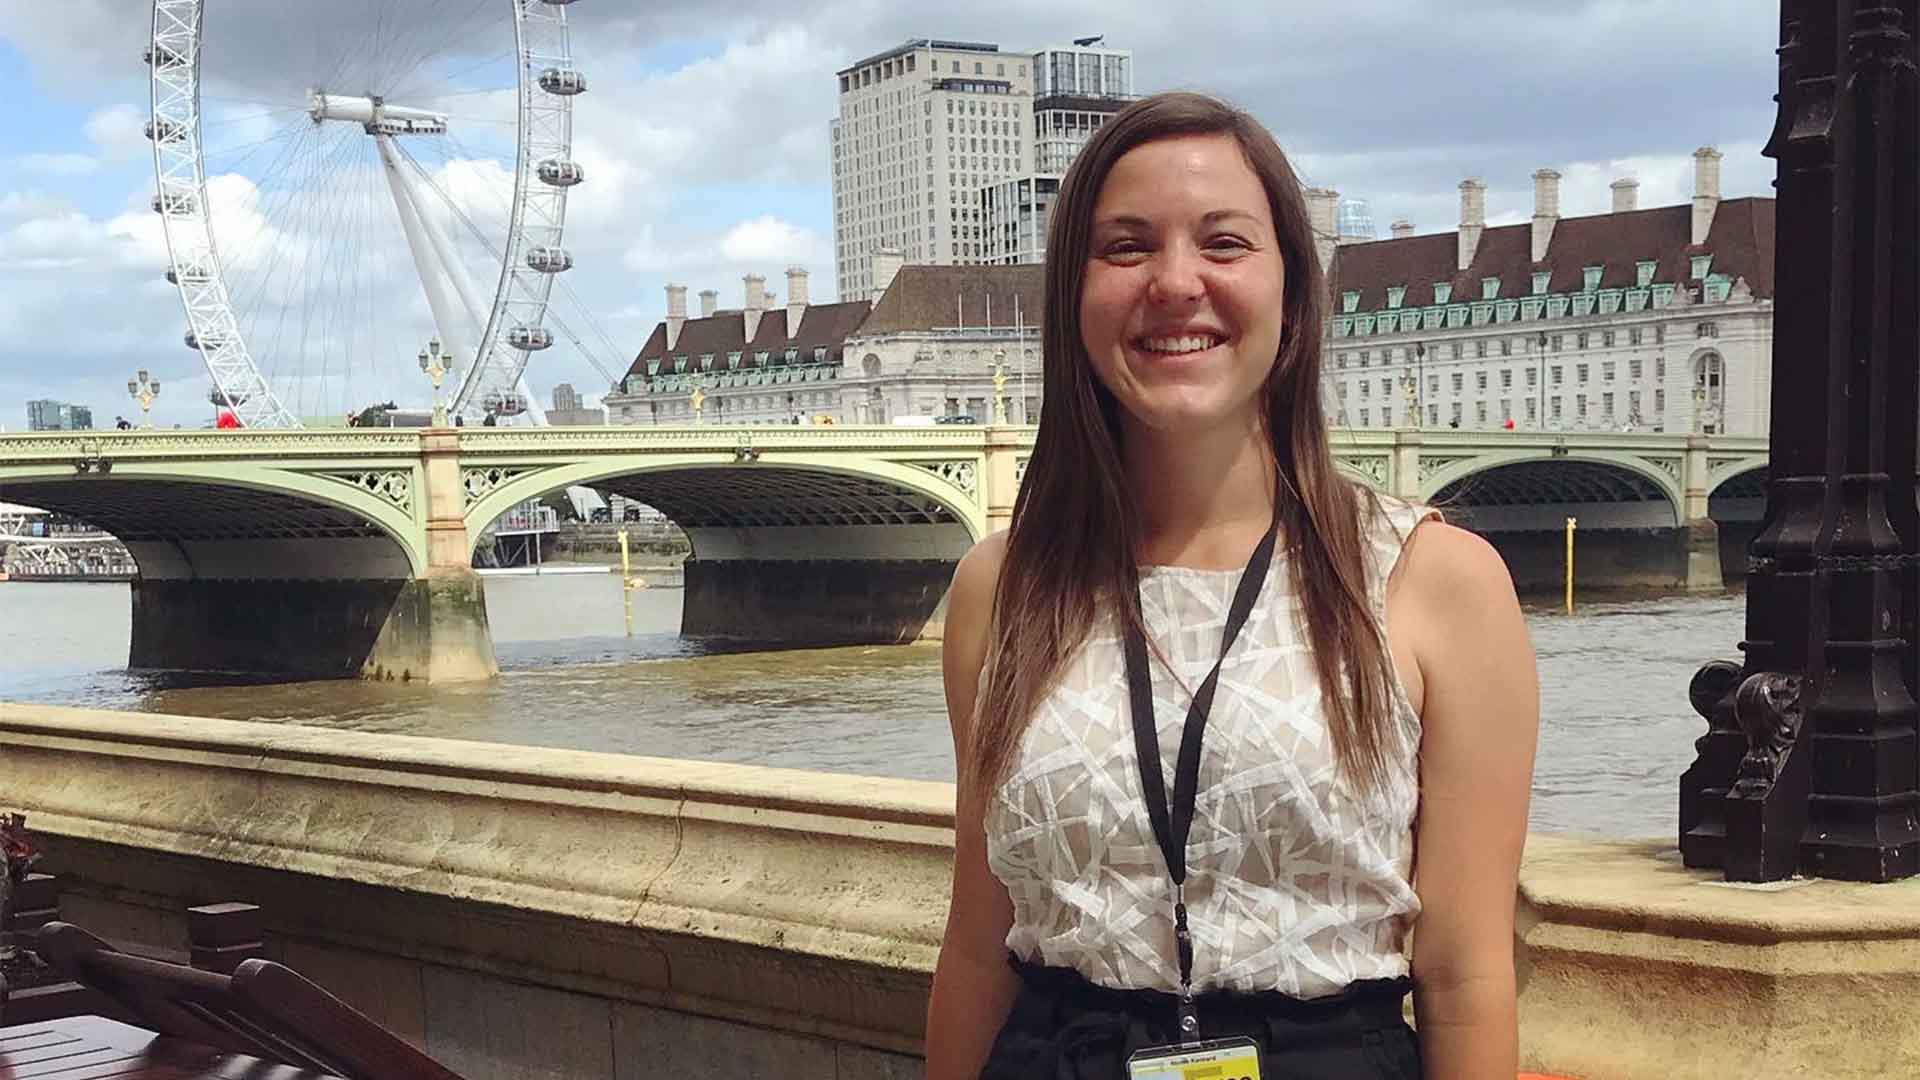 Nicole Kennard who has completed a fellowship UK parliament